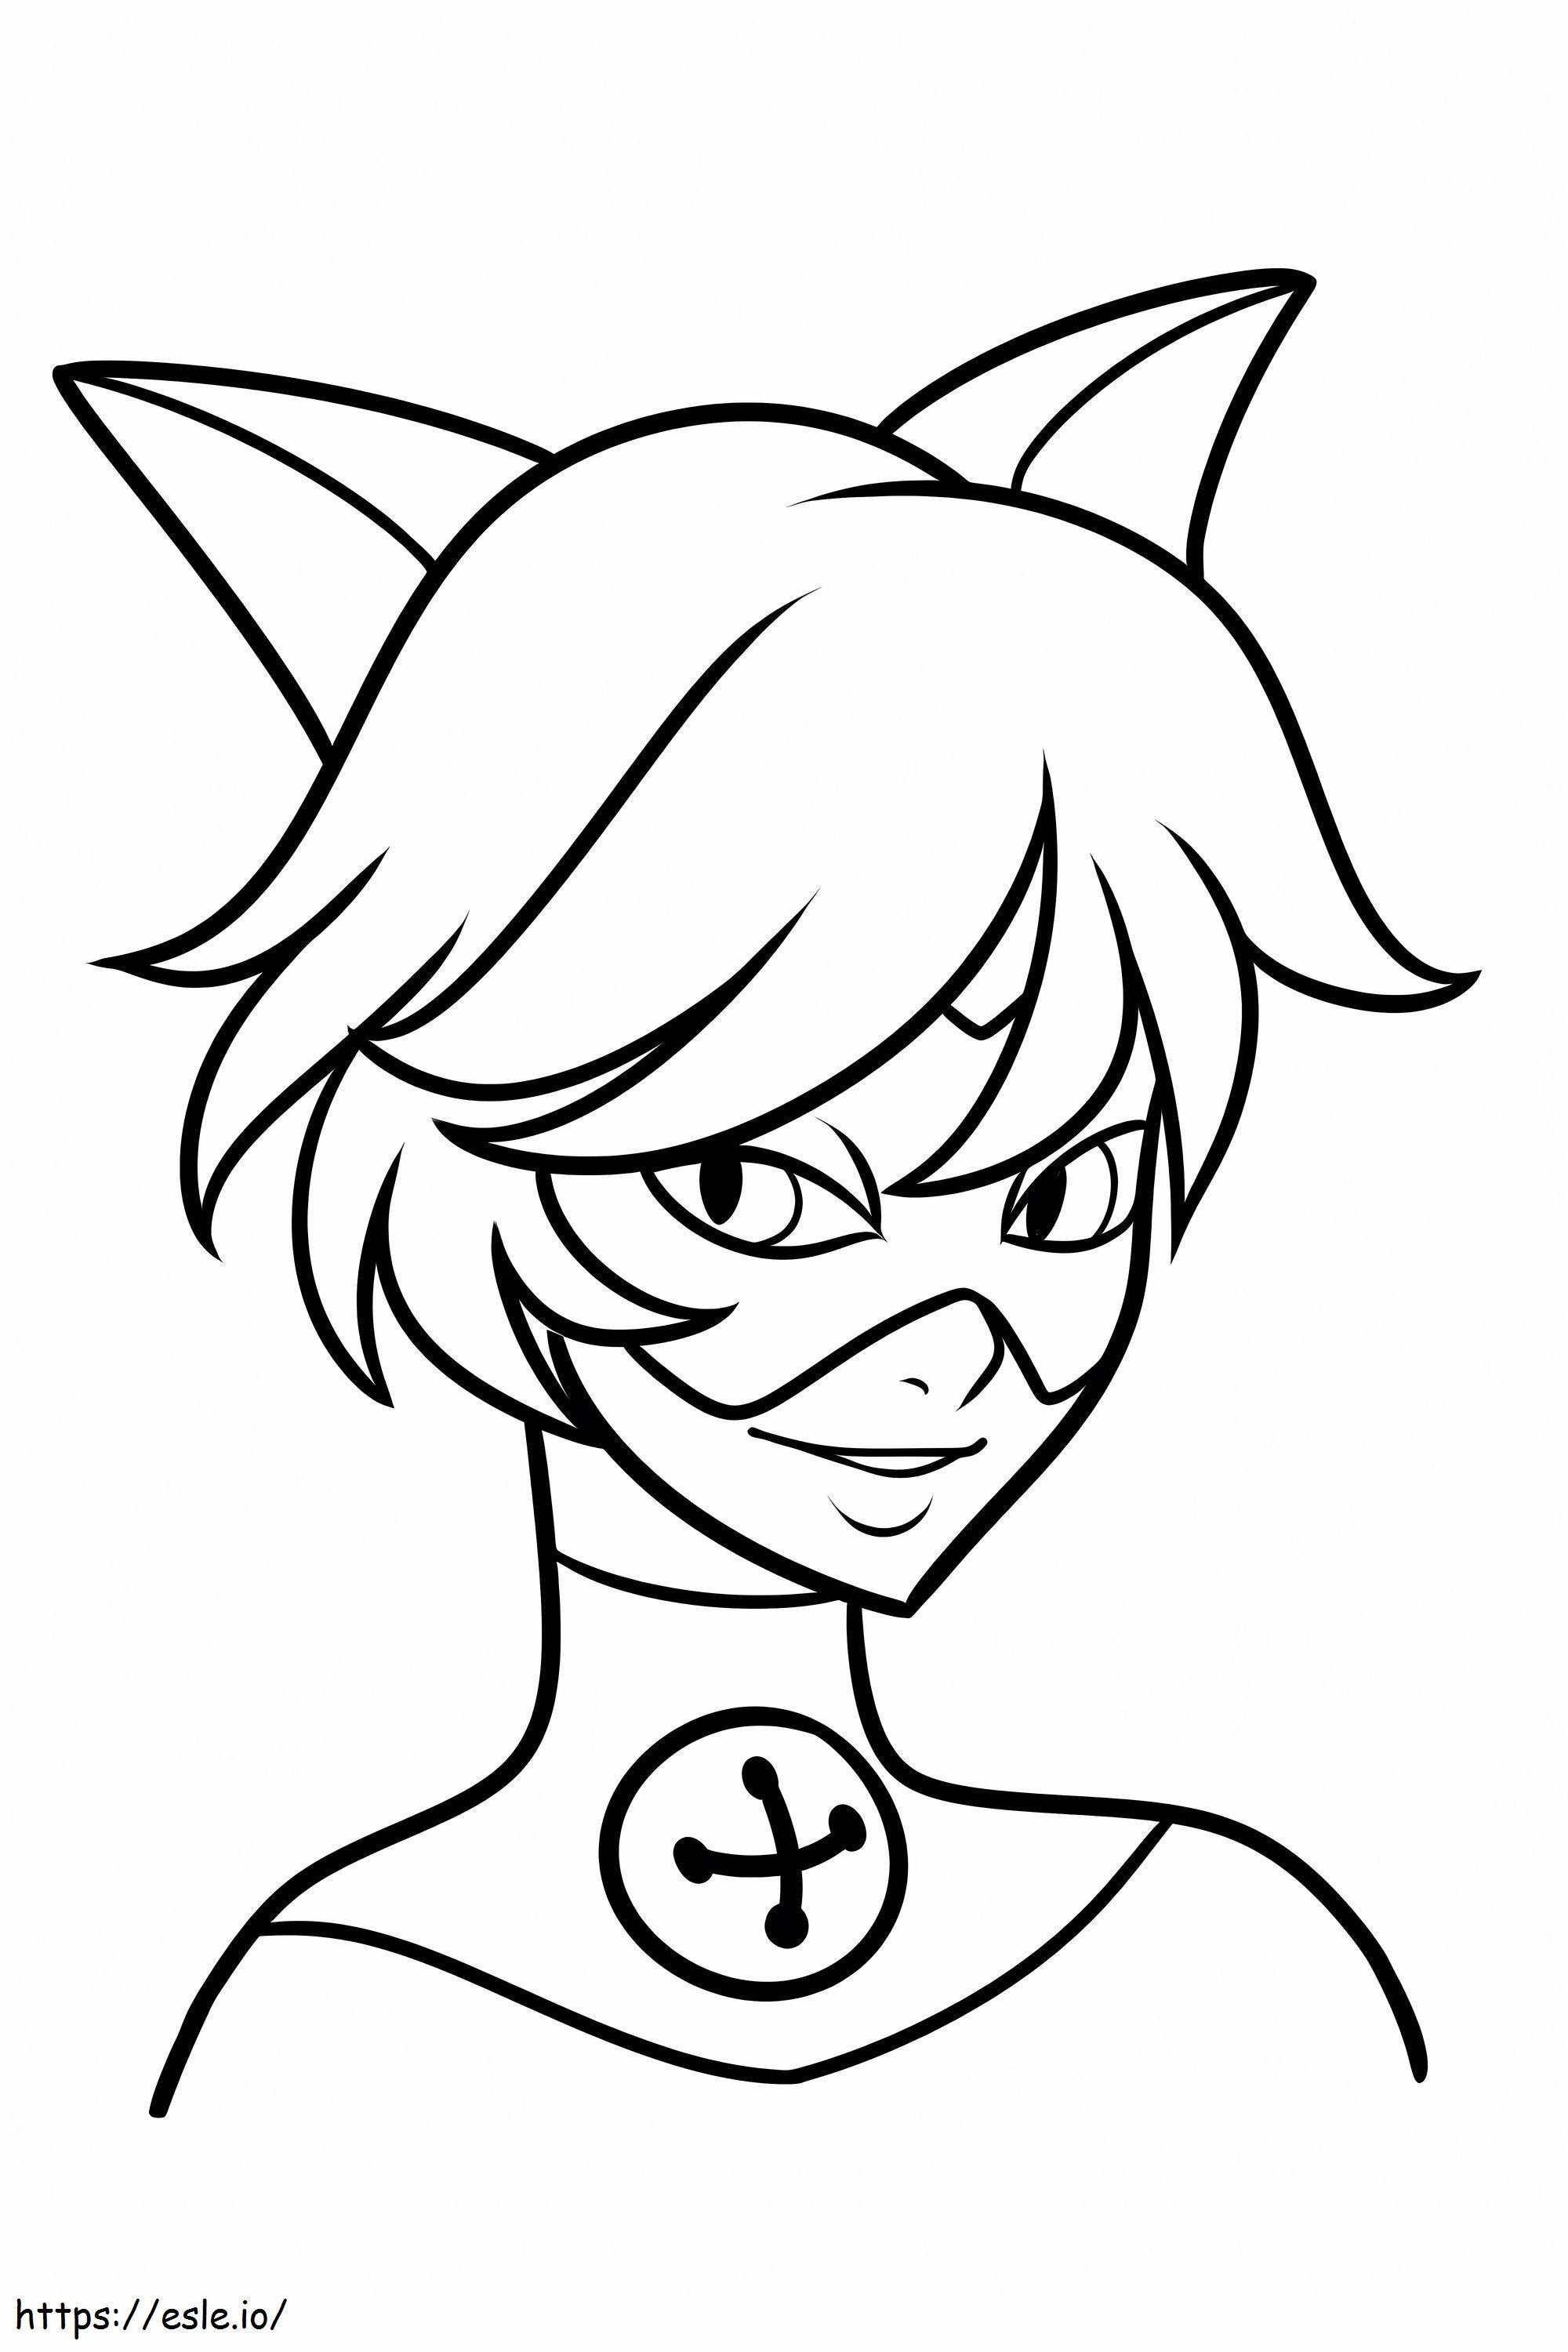 Black Cat coloring page